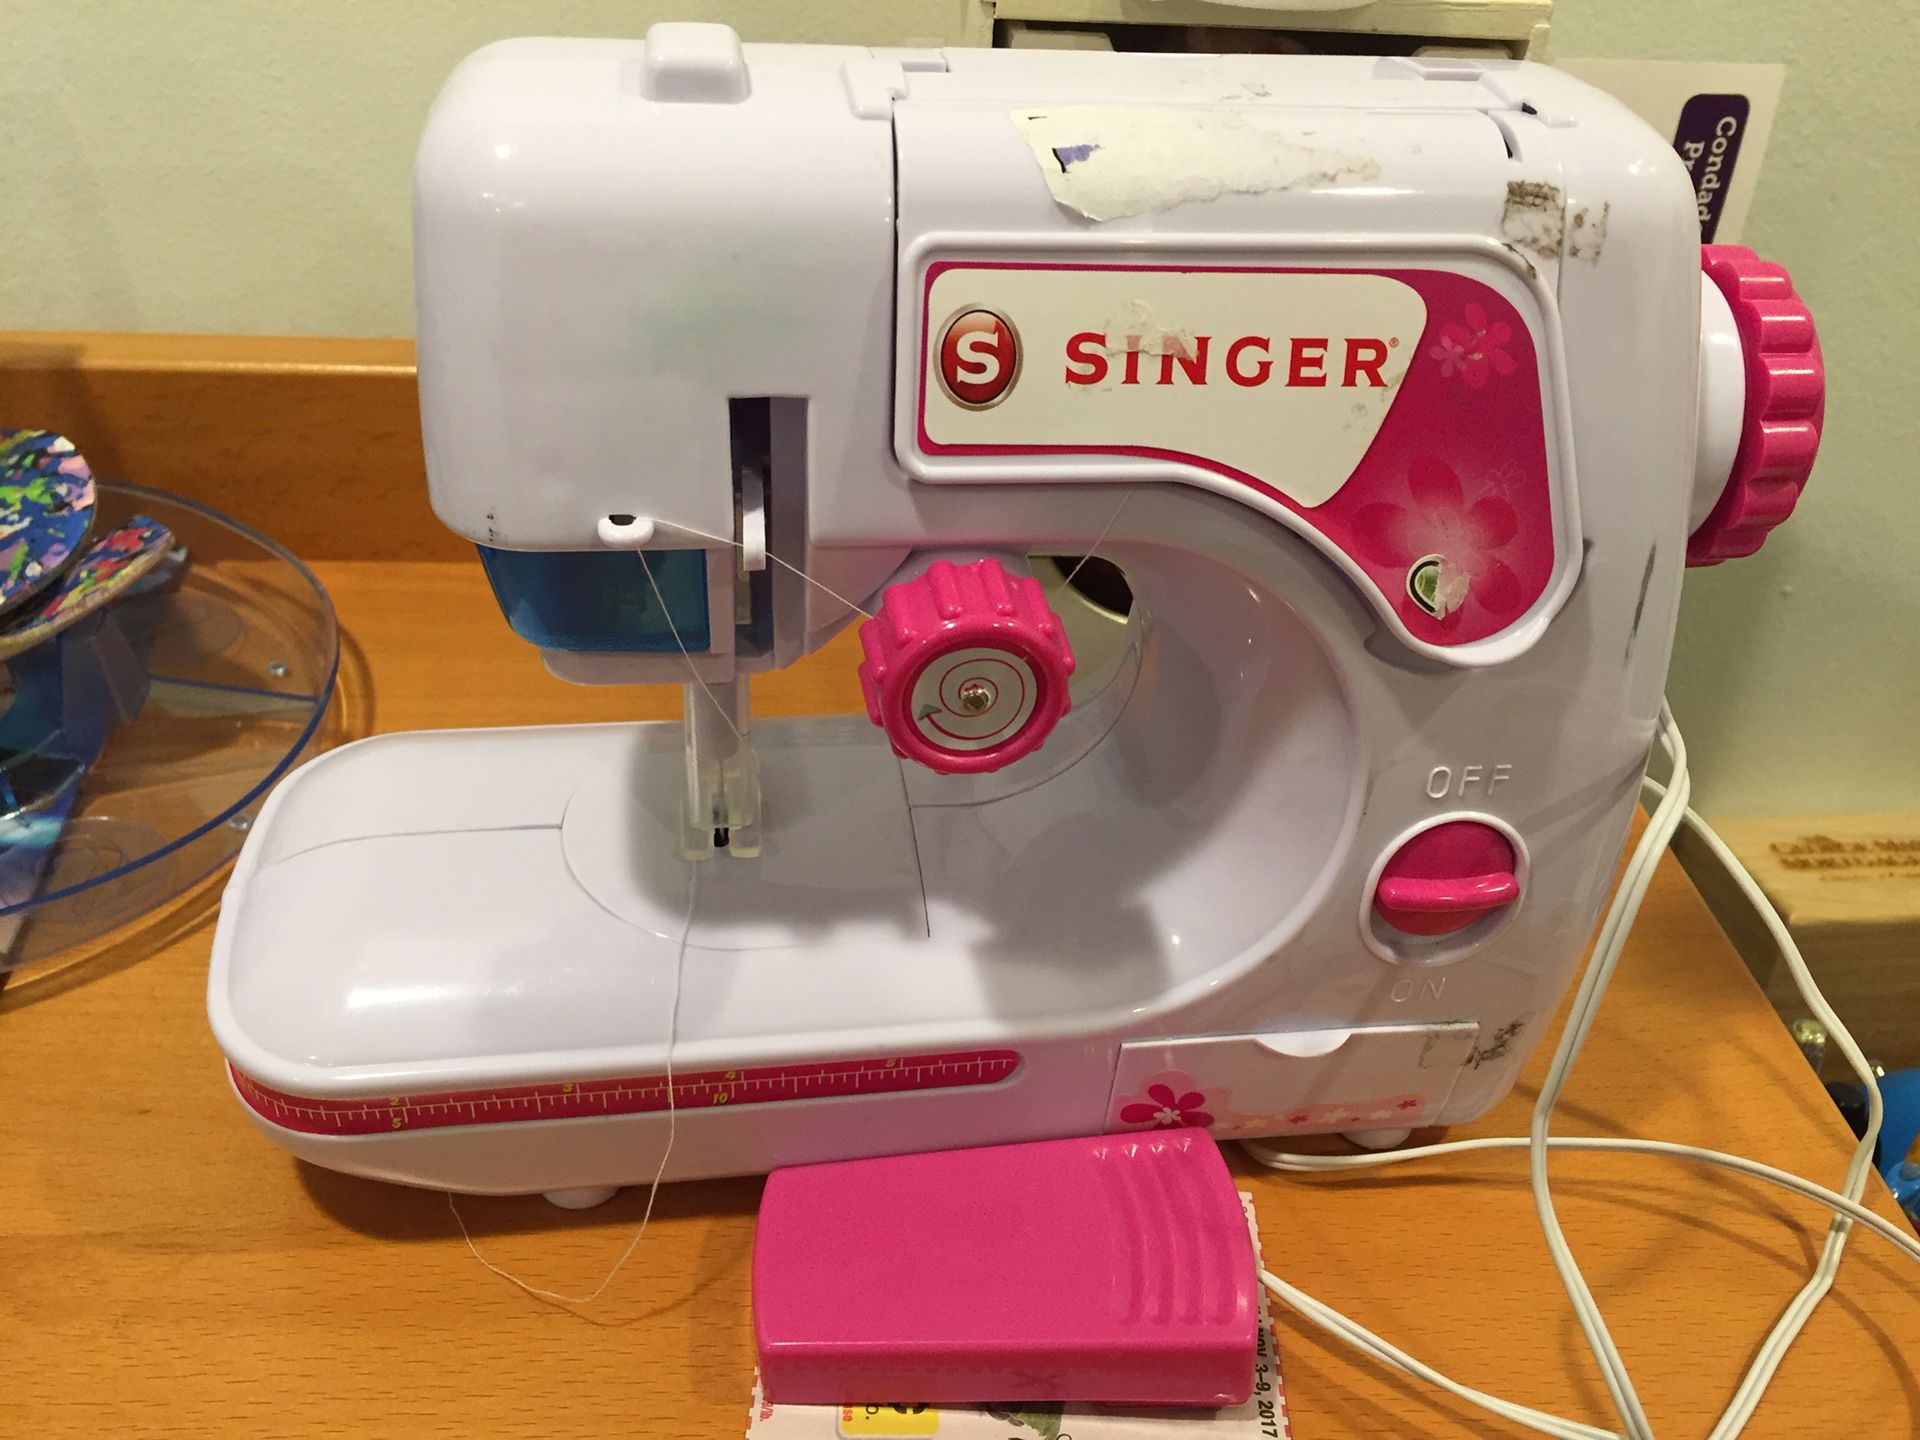 Sewing machine toy for kids